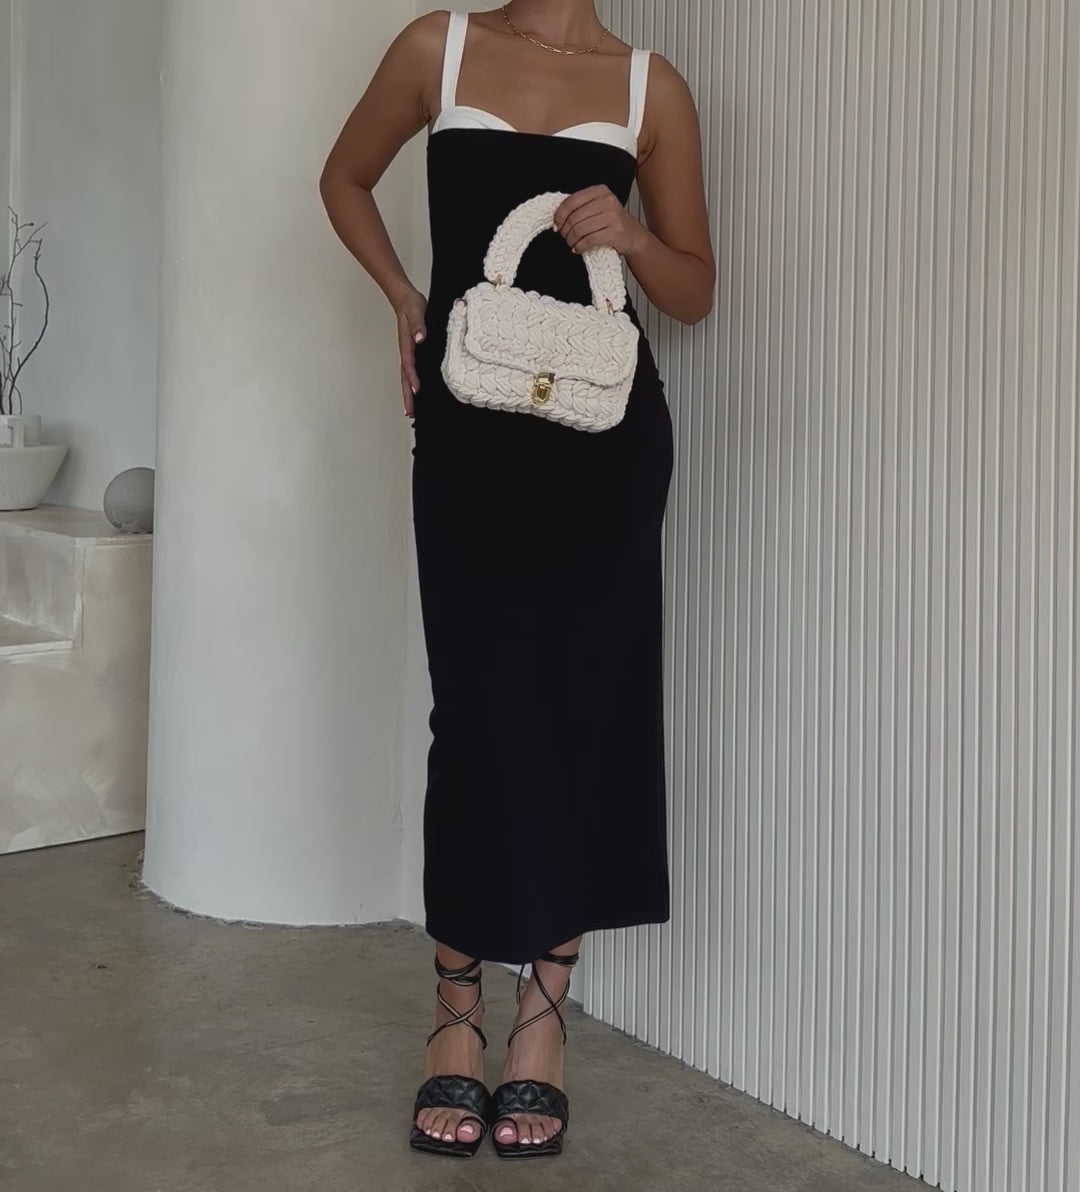 Video of a model holding a white knitted crossbody handbag with gold clasps against a white wall.